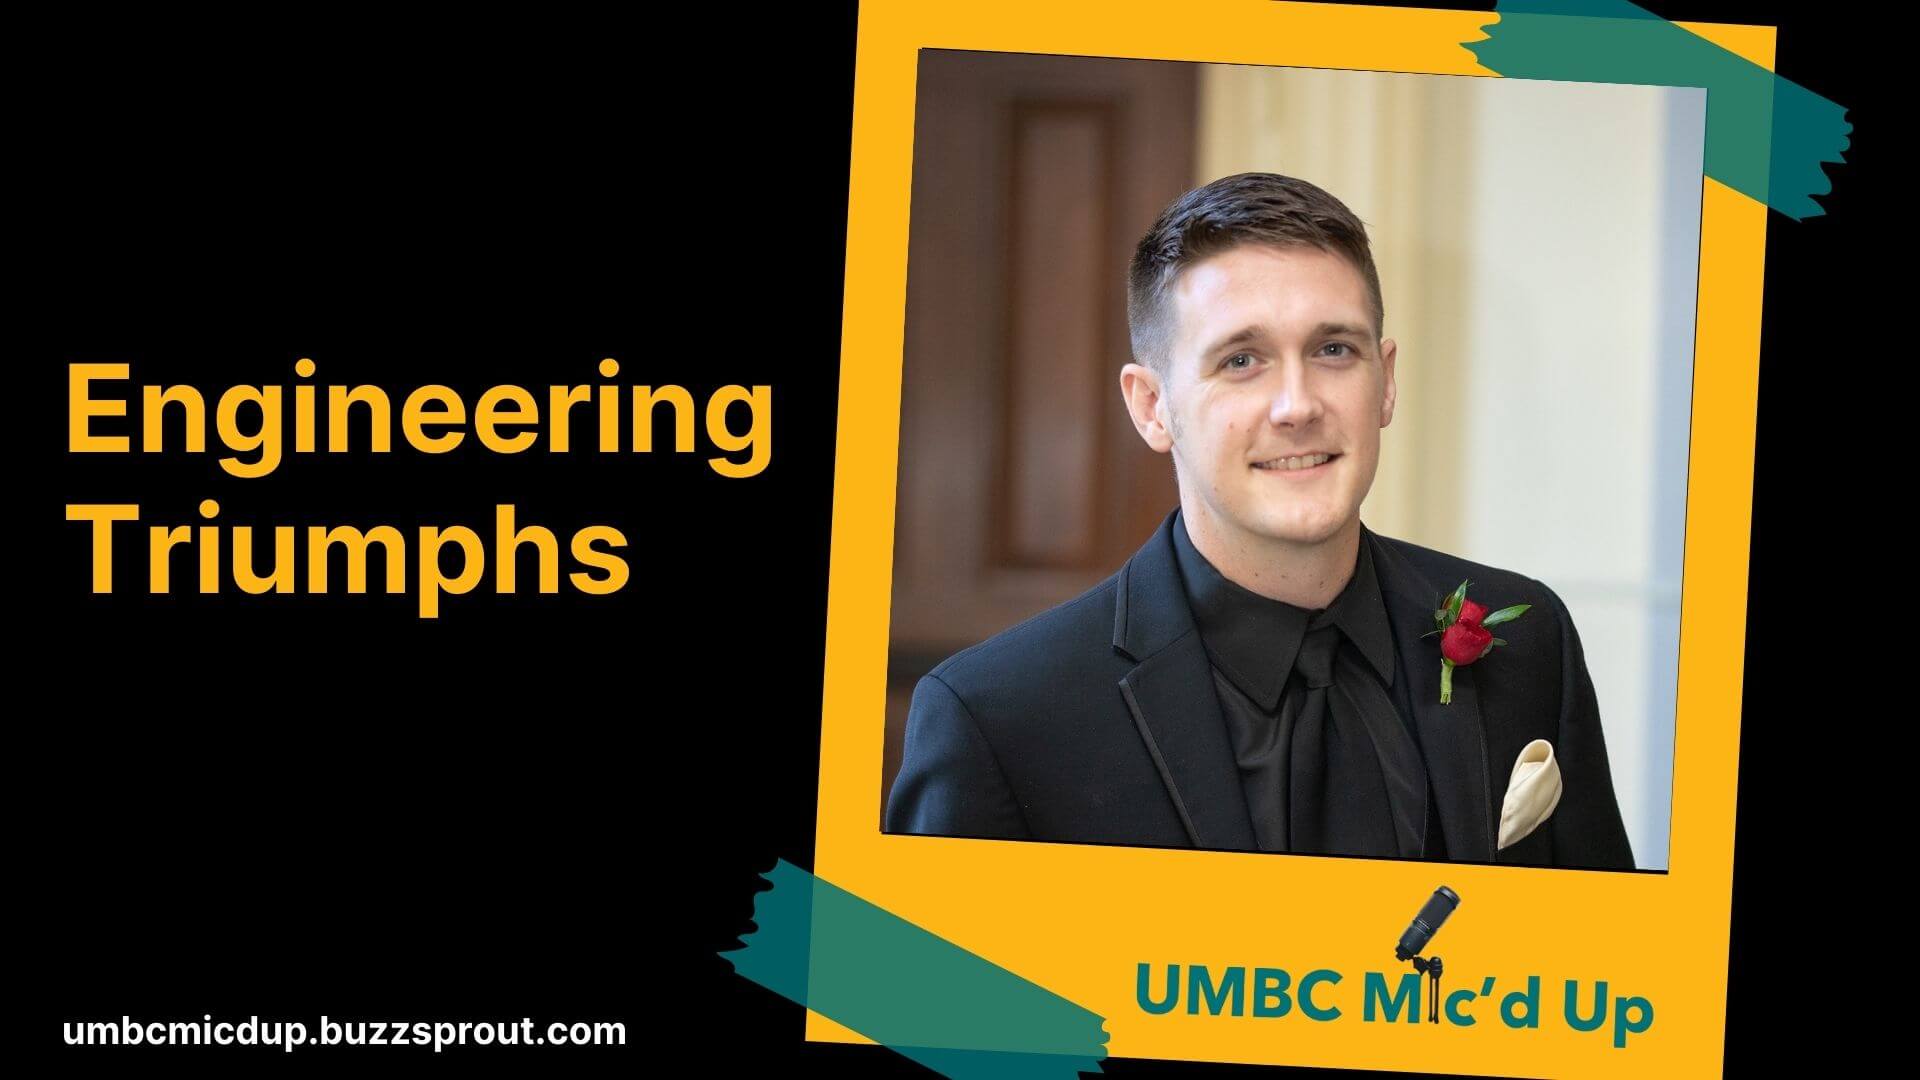 UMBC Mic'd Up Podcast features a recent engineering management graduate who is excelling in his engineering career.